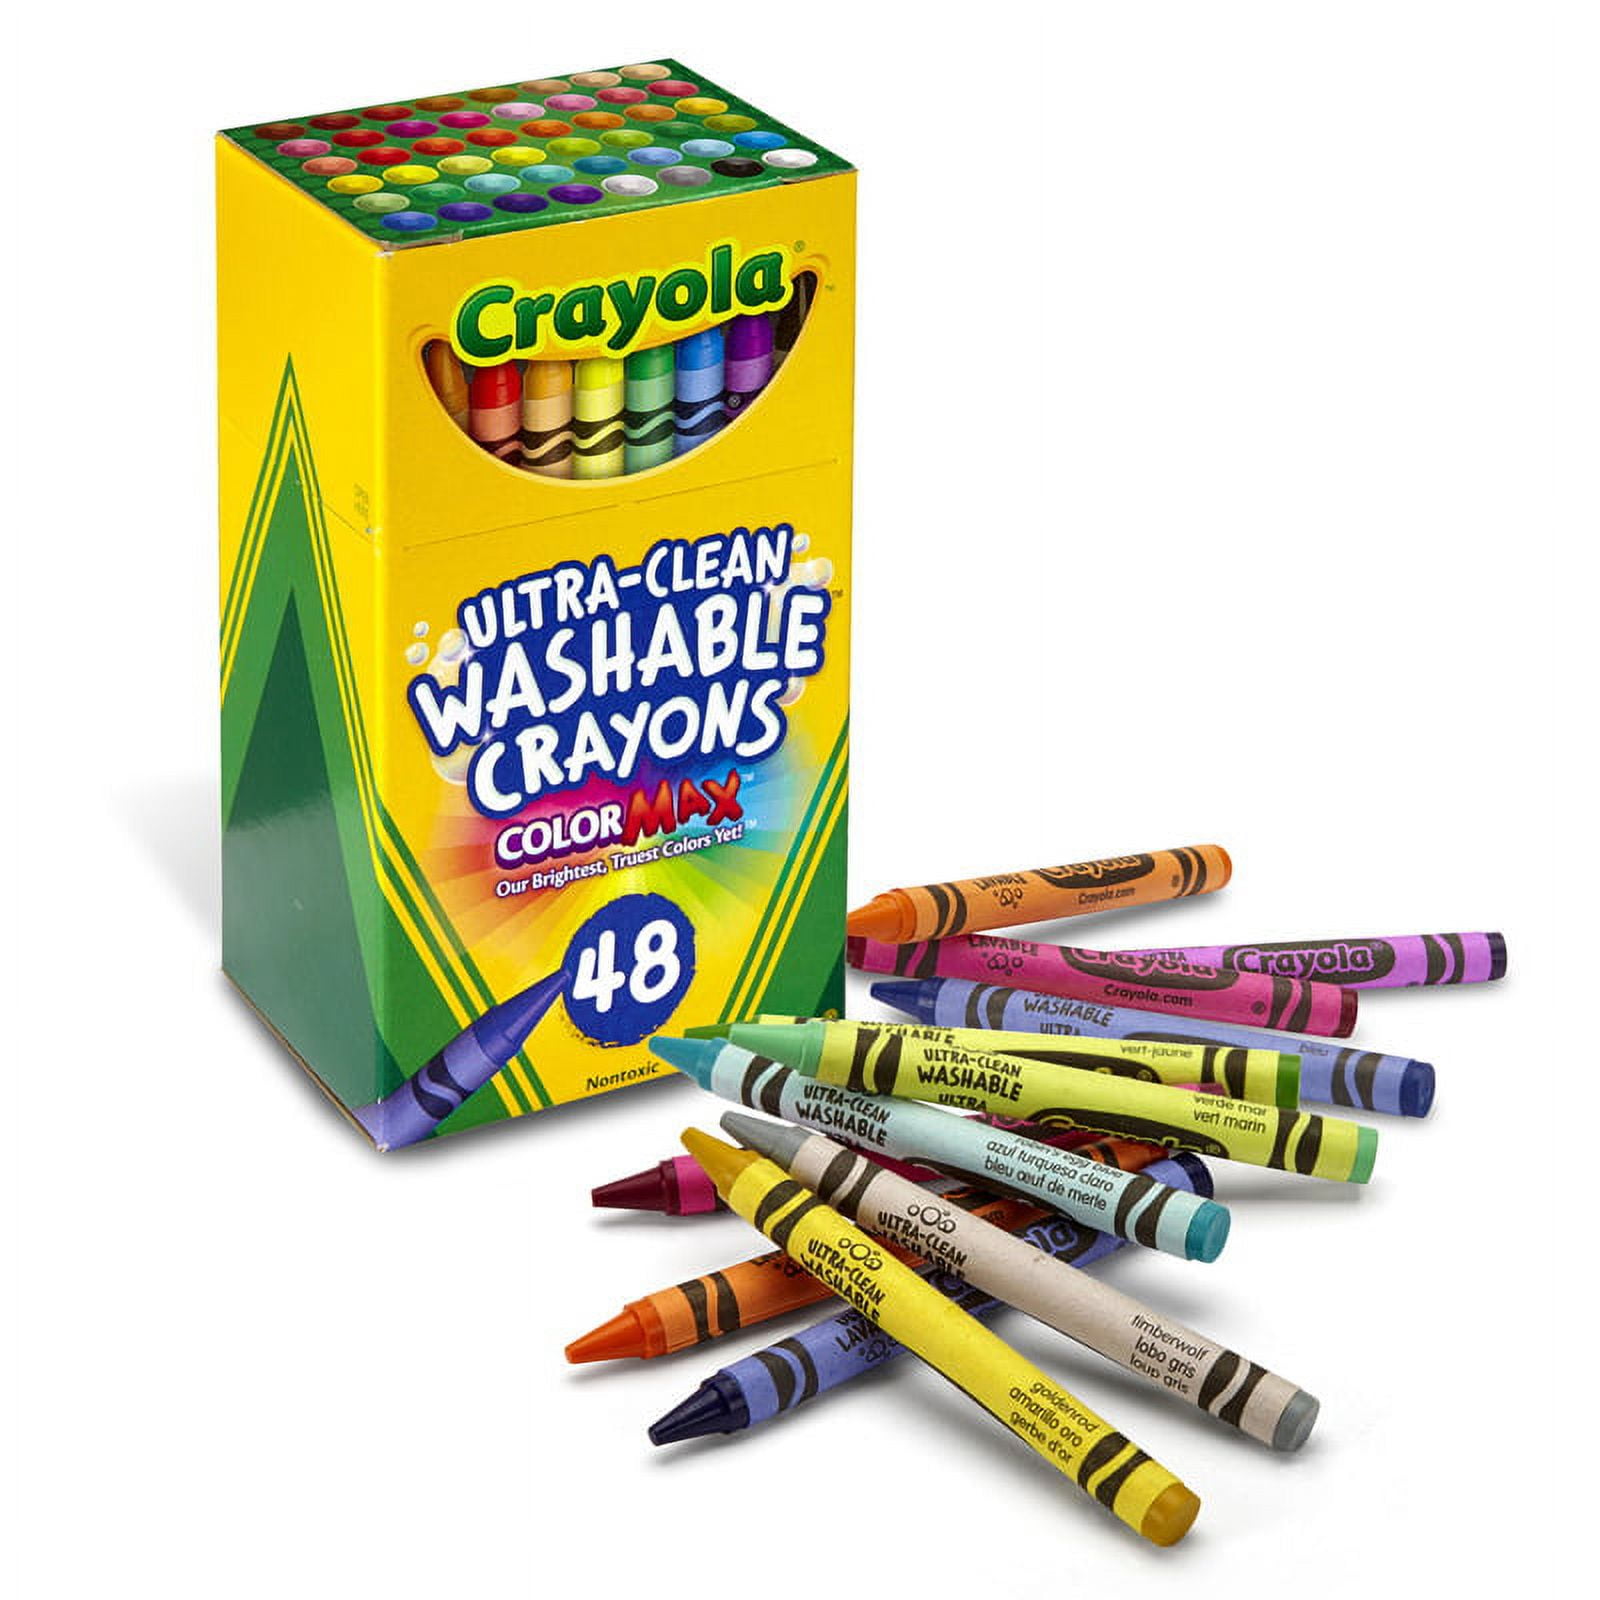 Crayola Large Single-Color Crayons Refill, Pink, Pack of 12 